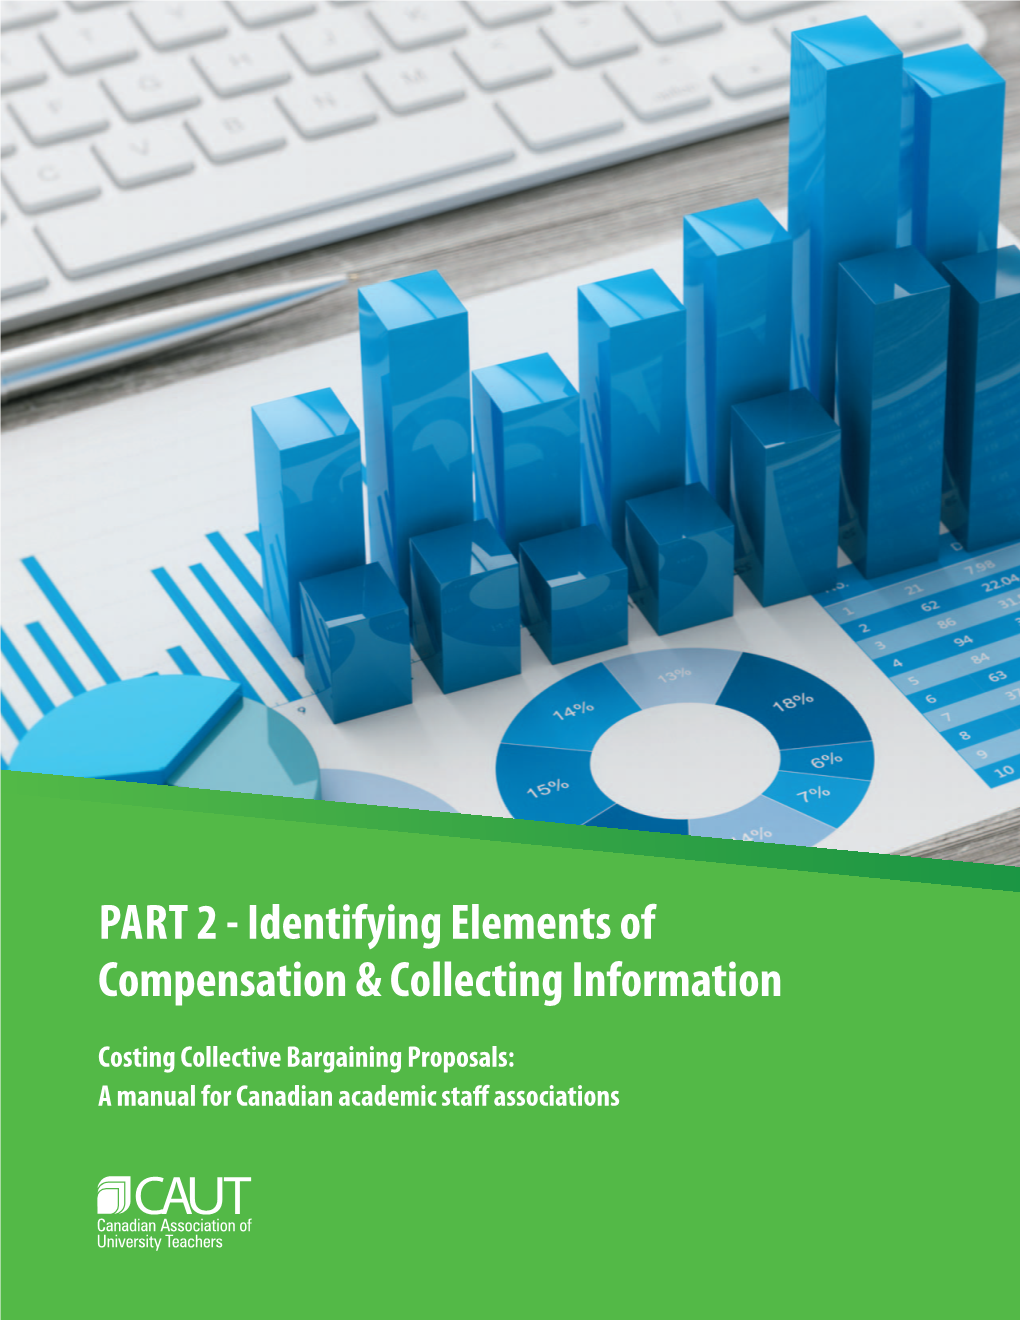 PART 2 - Identifying Elements of Compensation & Collecting Information